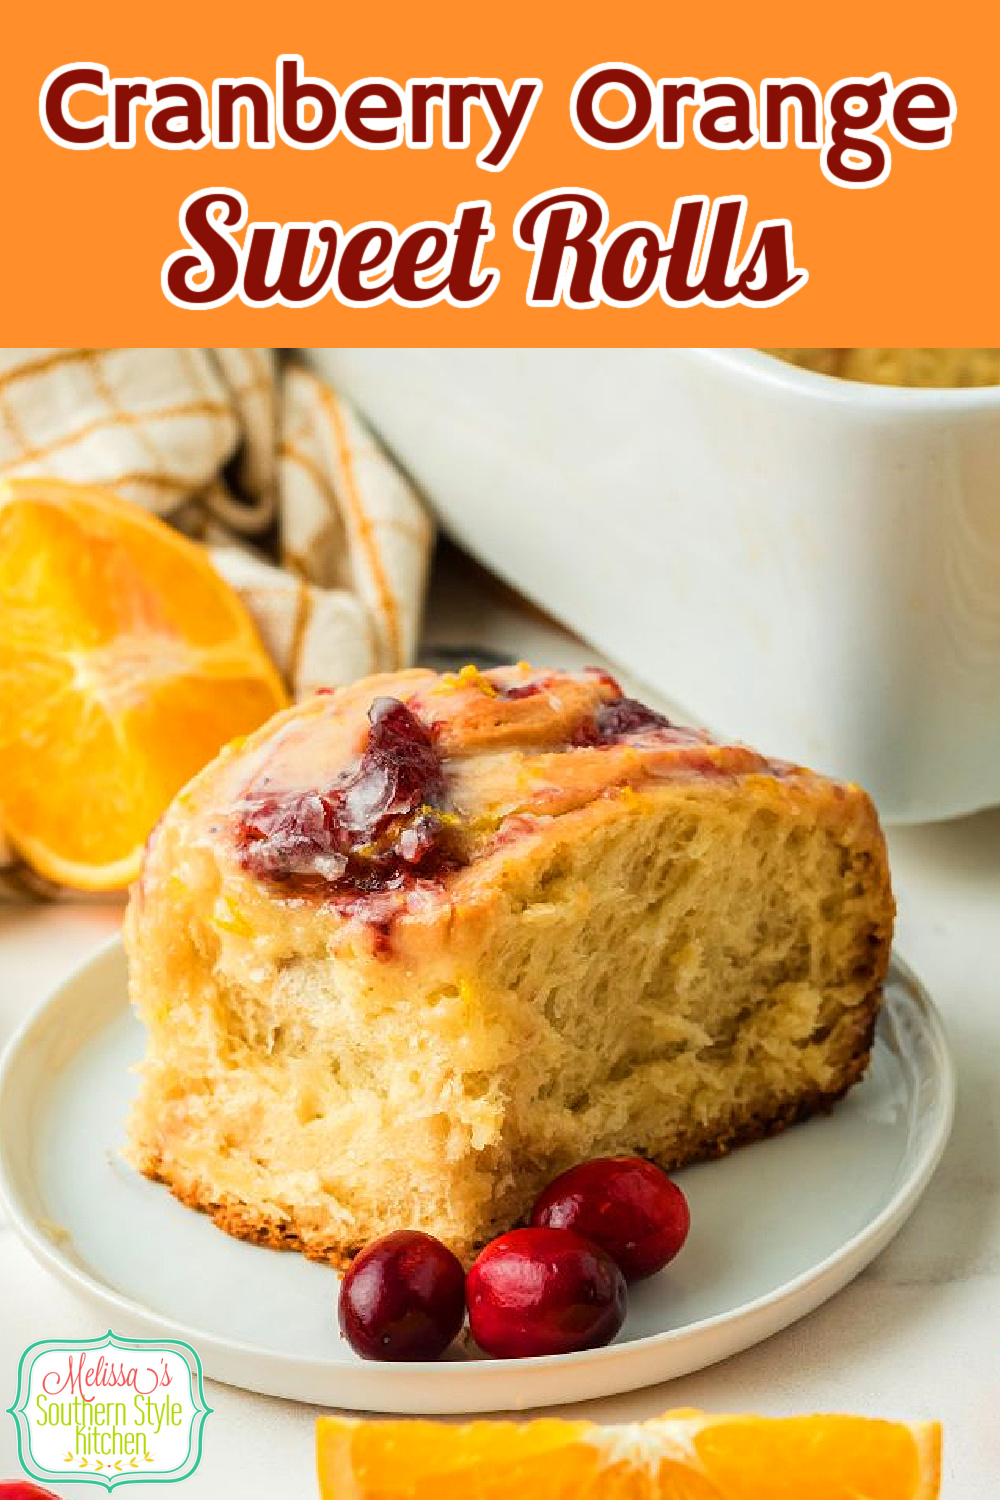 These bakery style Cranberry Orange Sweet Rolls will make a mouthwatering addition to your special occasion sweet treats menu #cranberries #cranberryorangesweetrolls #cranberryrolls #cinnamonrolls #cranberryrolls #orangecinnamonrollsv